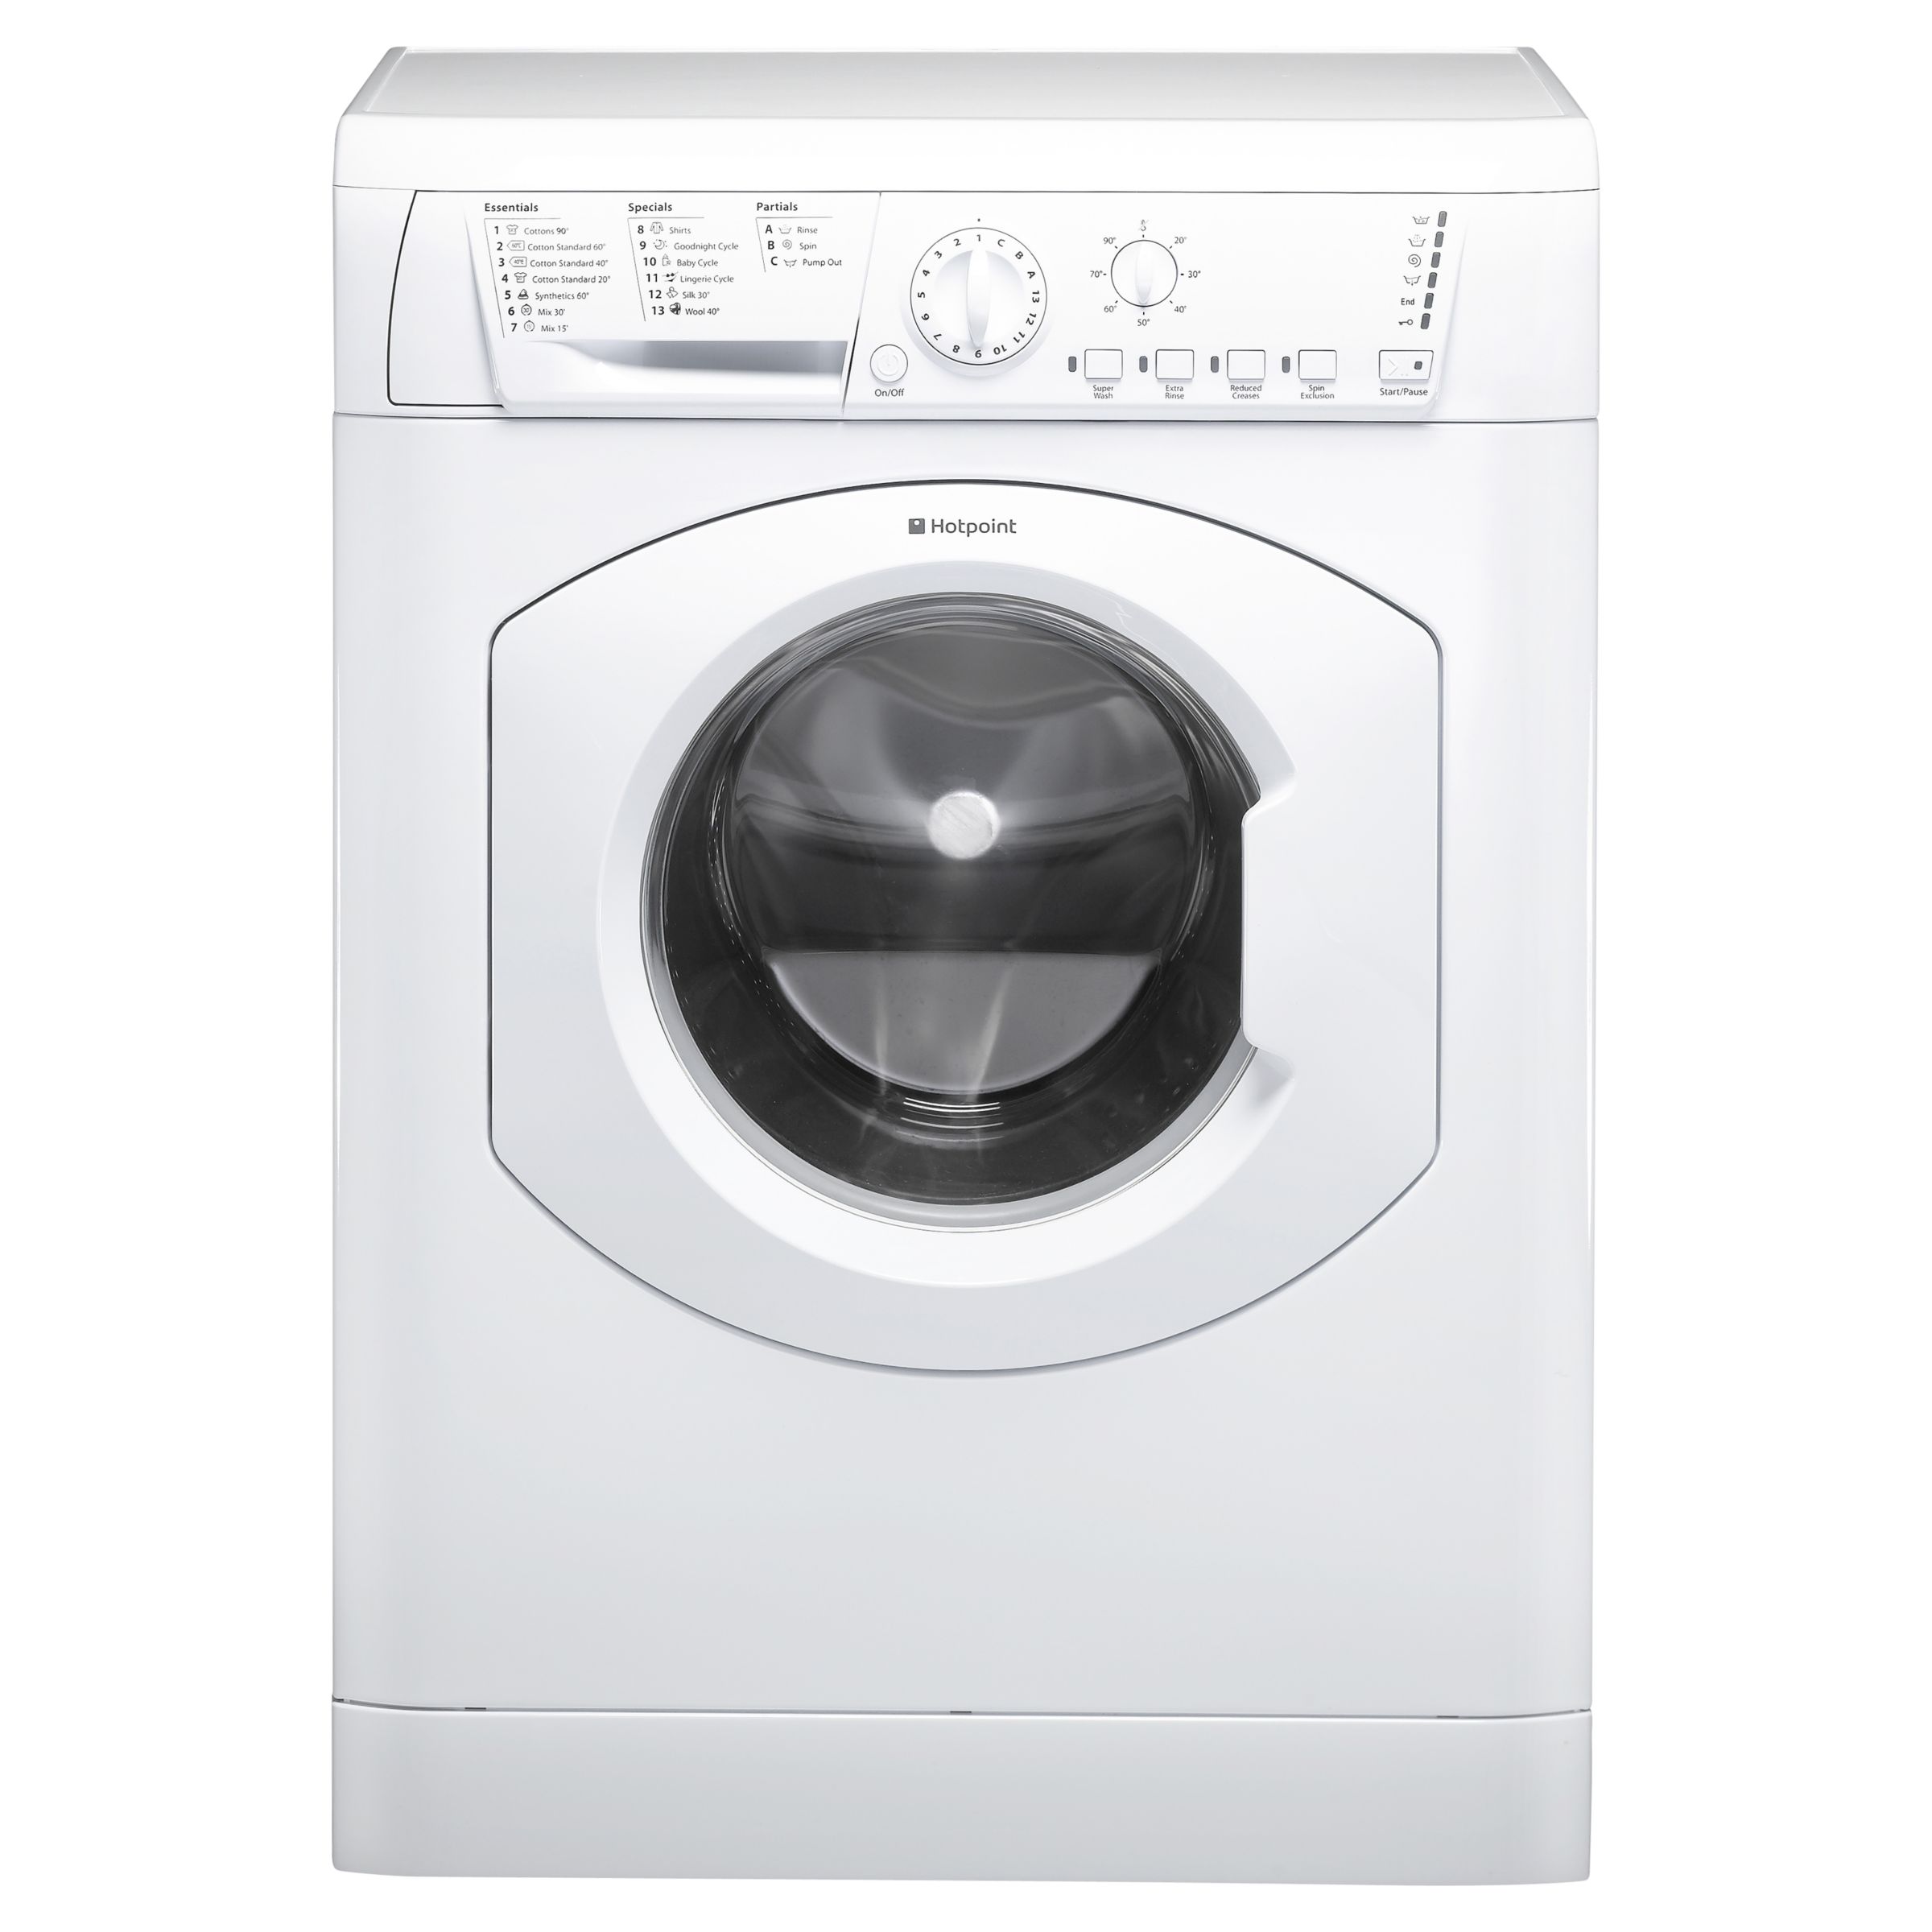 Hotpoint HTB721P Slimdepth Washing Machine, 7kg Load, A+ Energy Rating, 1200rpm Spin, White